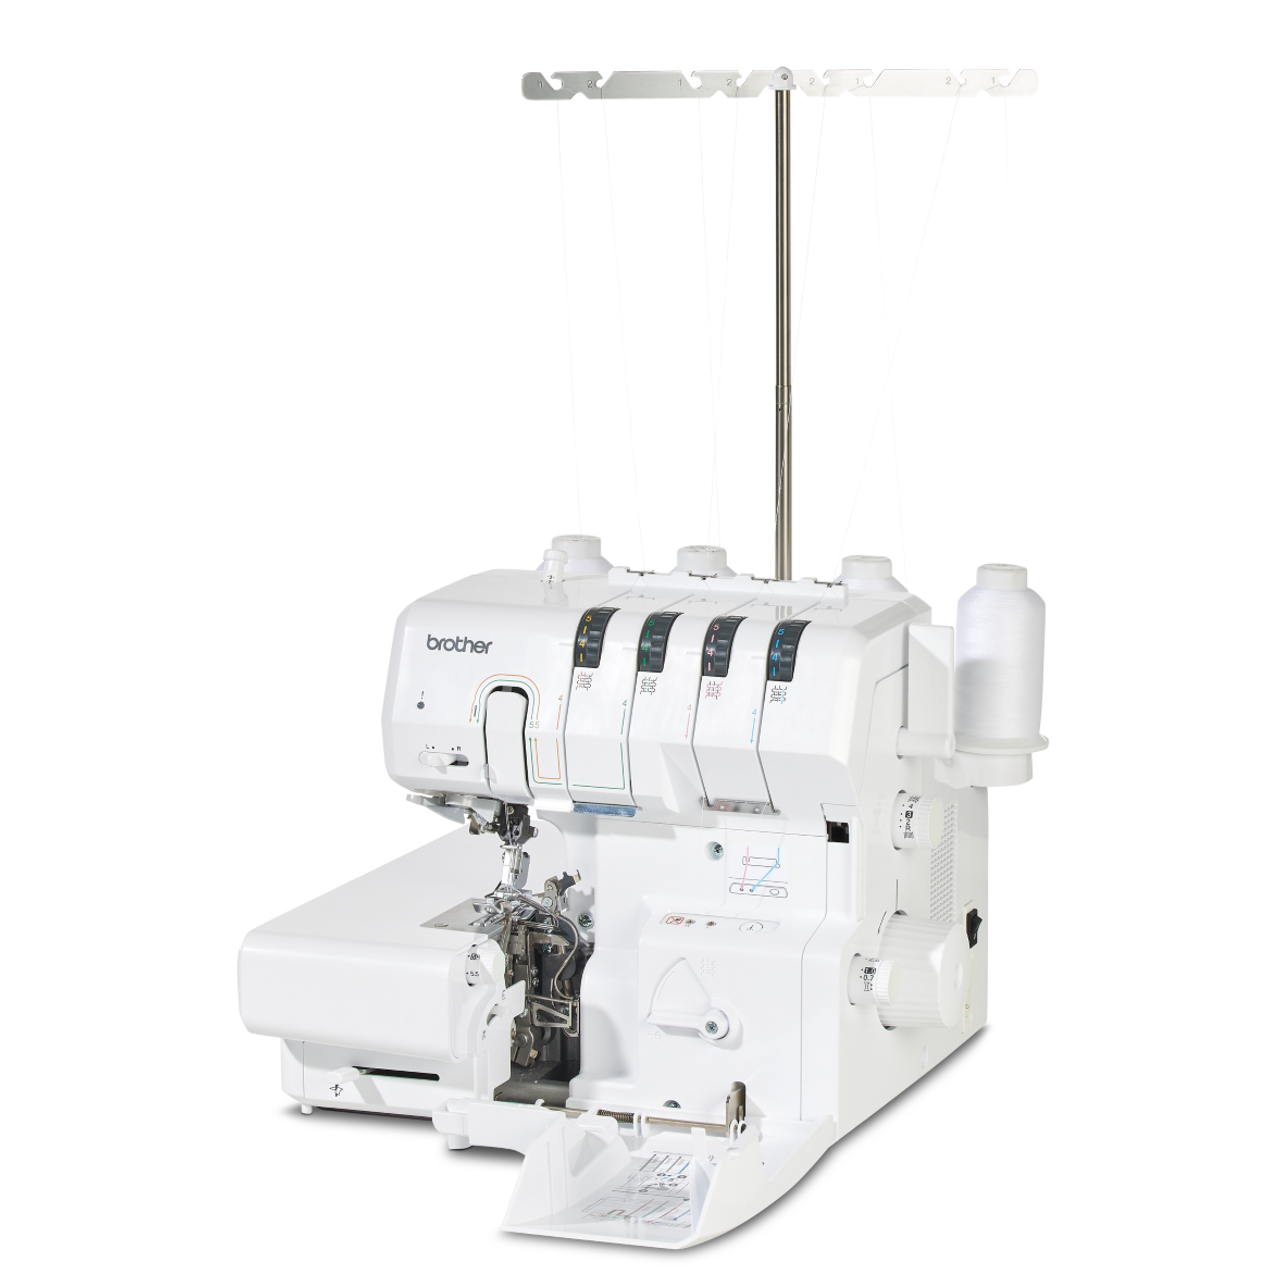 Brother Airflow 3000 Air Serger - Recertified – Quality Sewing